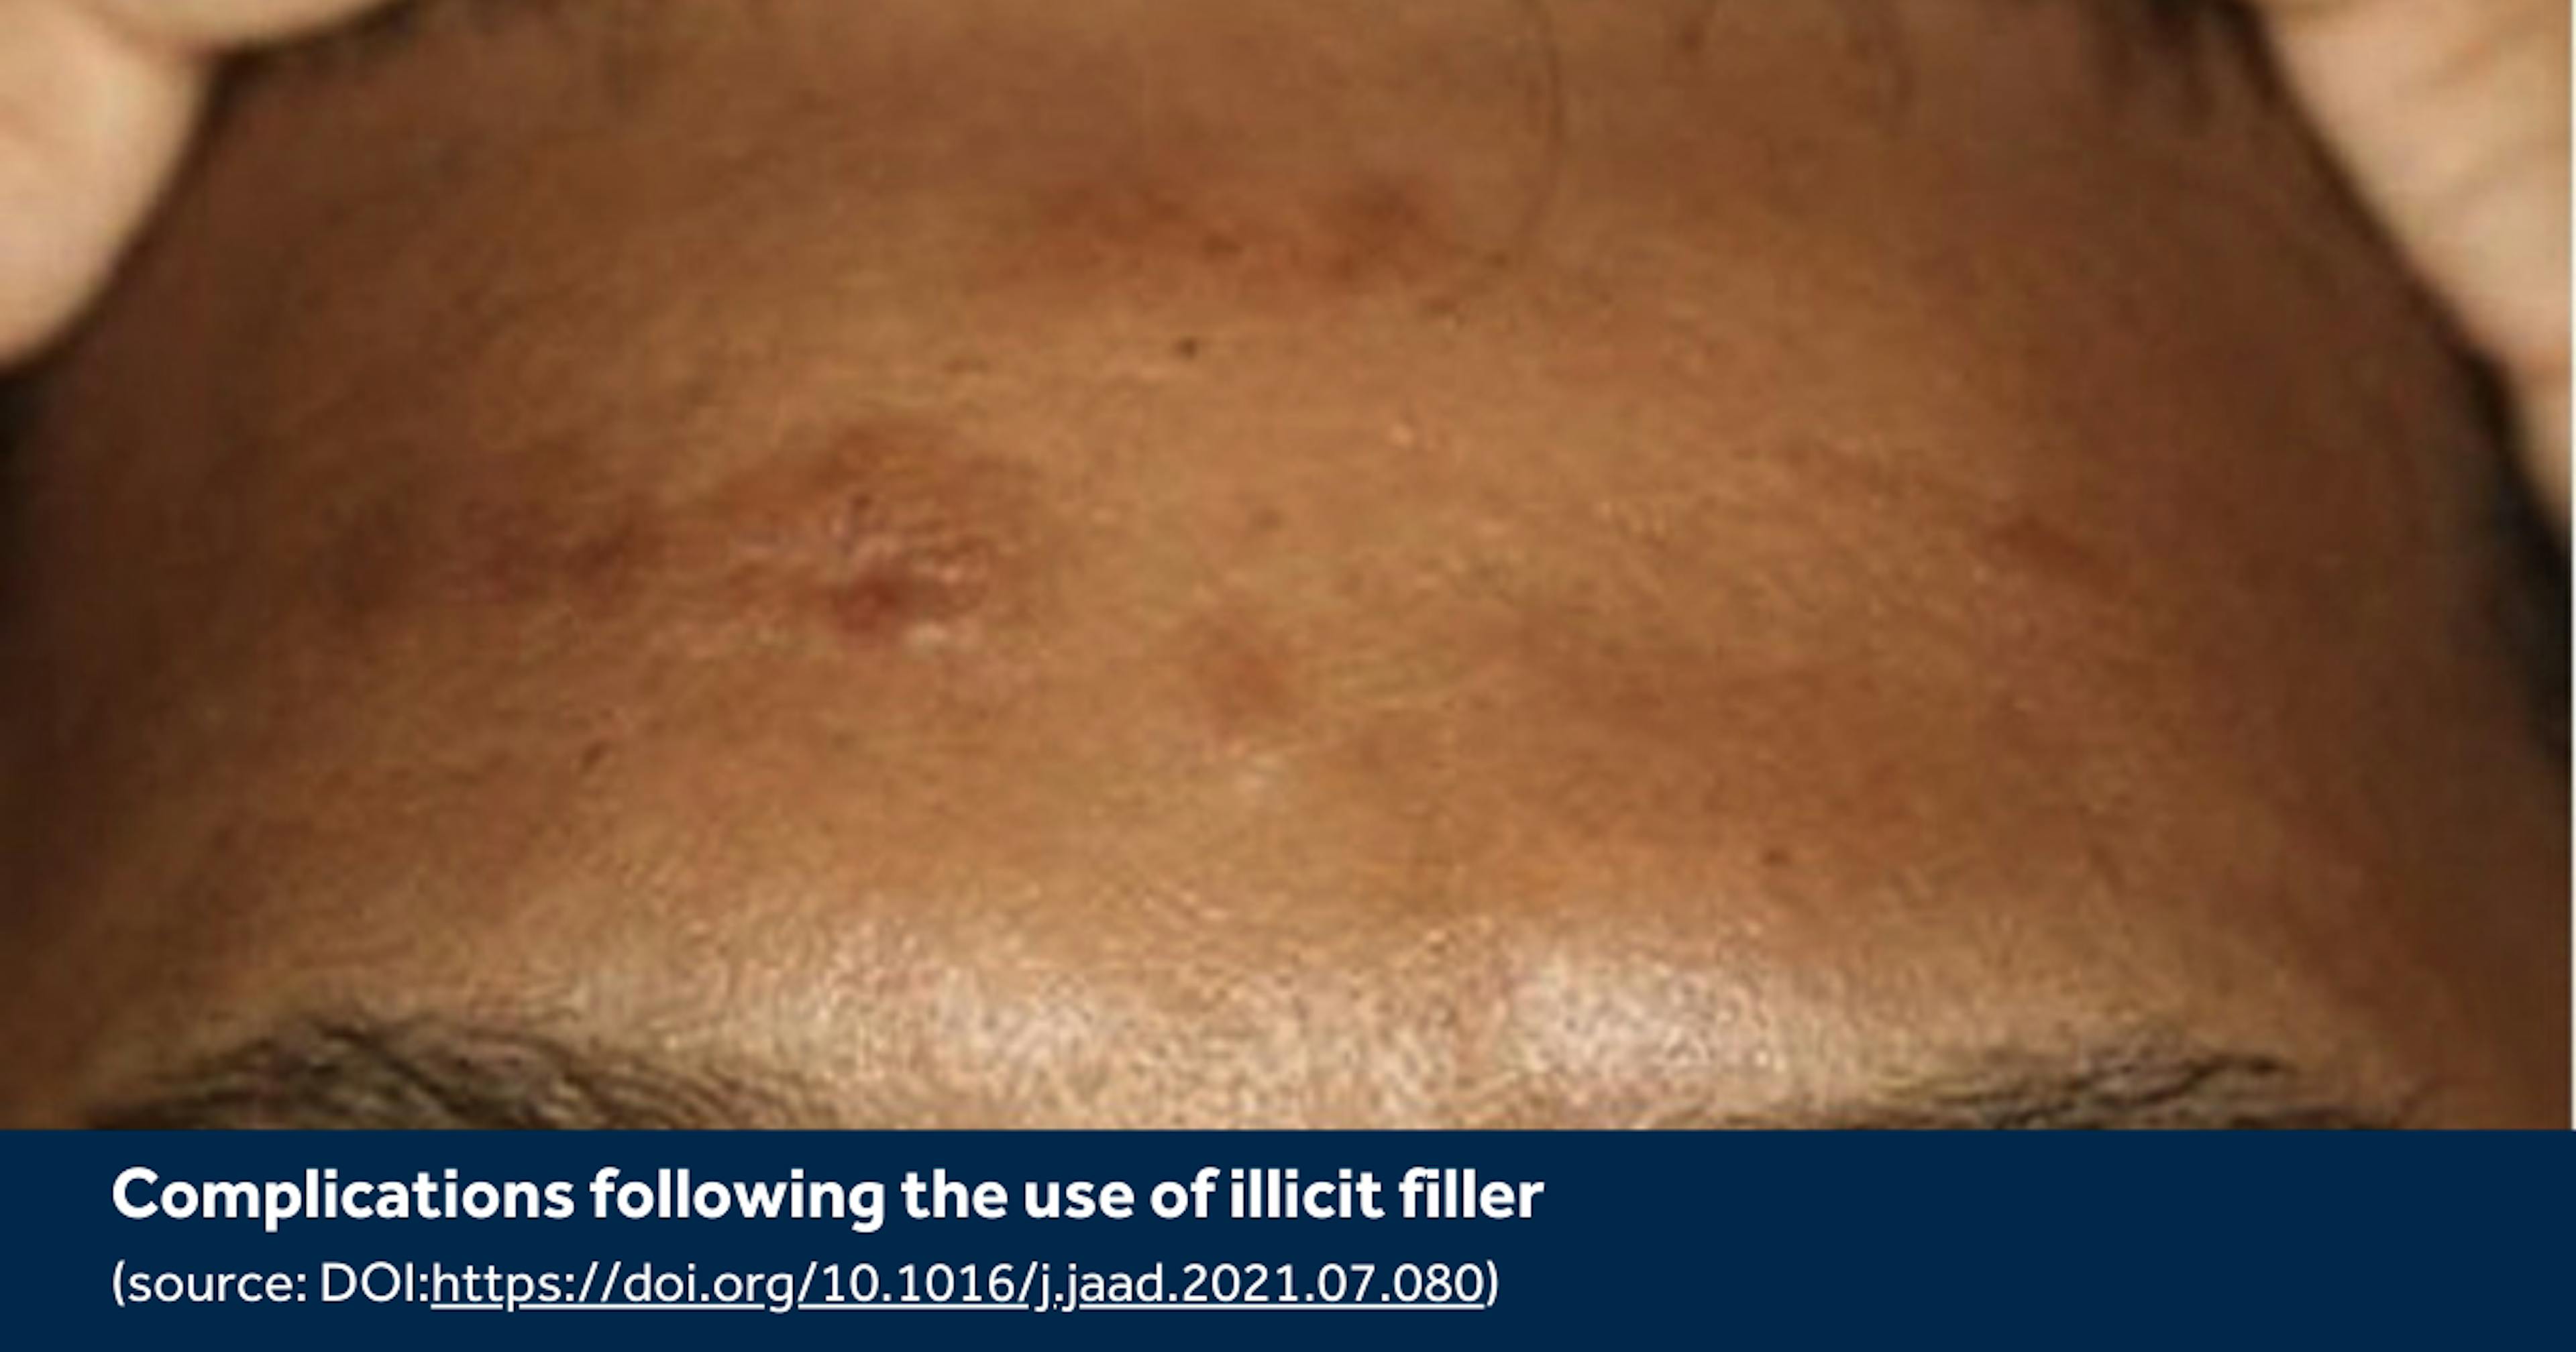 Filler Complications in Skin of Colour